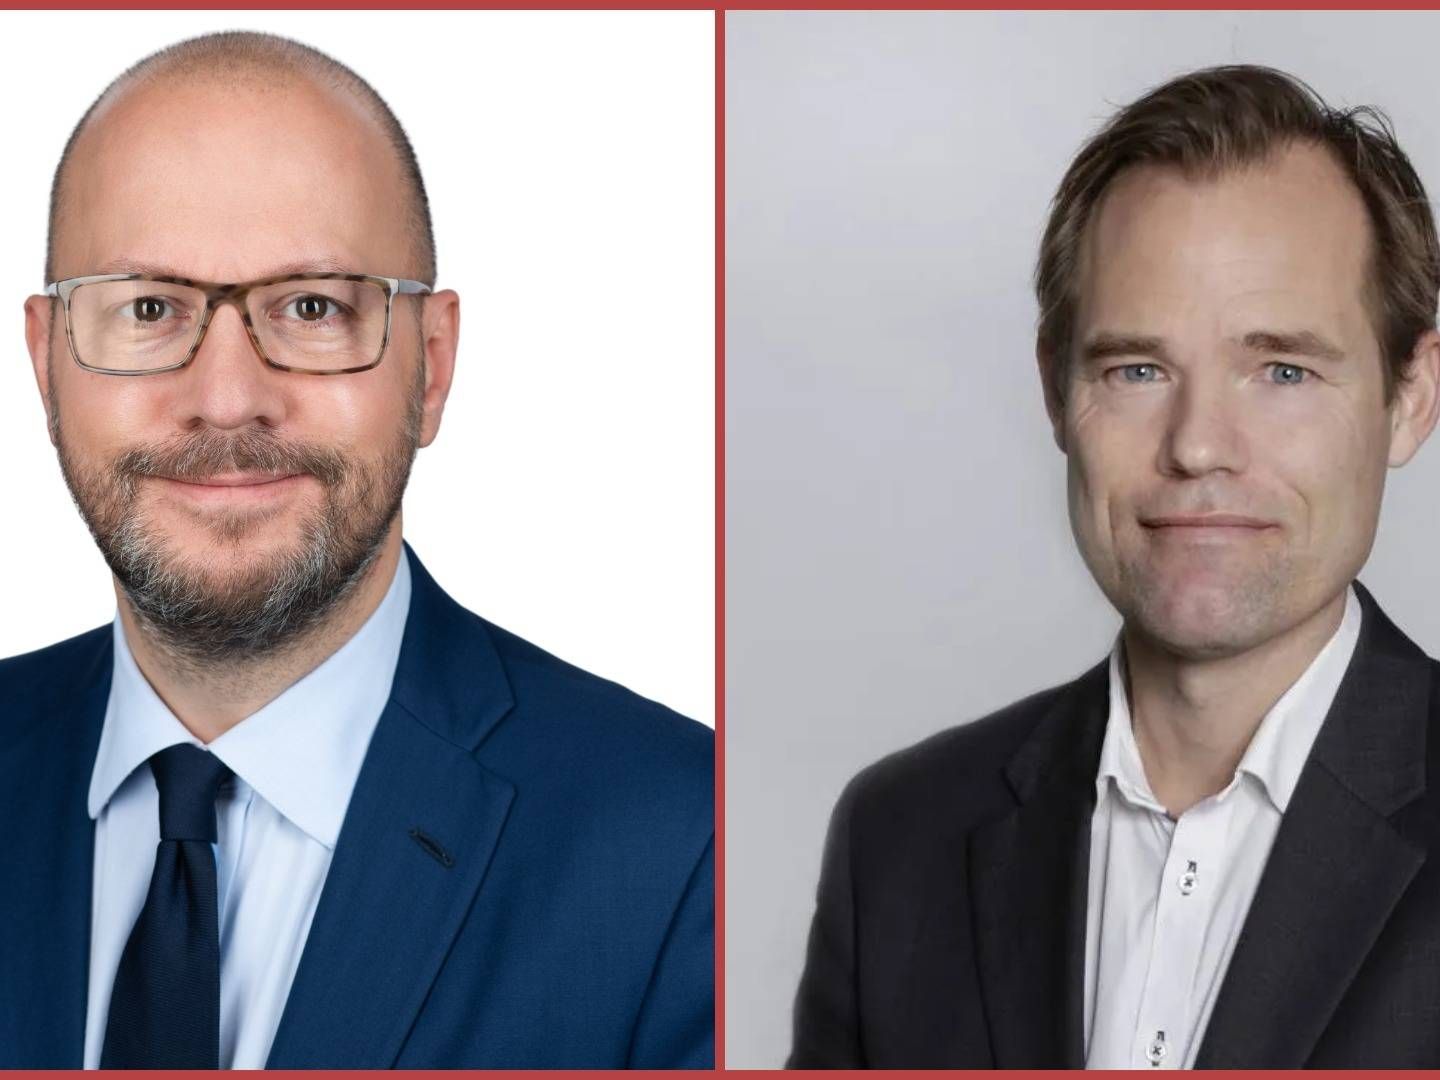 Jonathan Stevens, Head of European Infrastructure Debt at BlackRock and Anders Dalhoff, Managing Partner at Advantage Investment Partners. | Photo: PR / BlackRock & Advantage Investment Partners